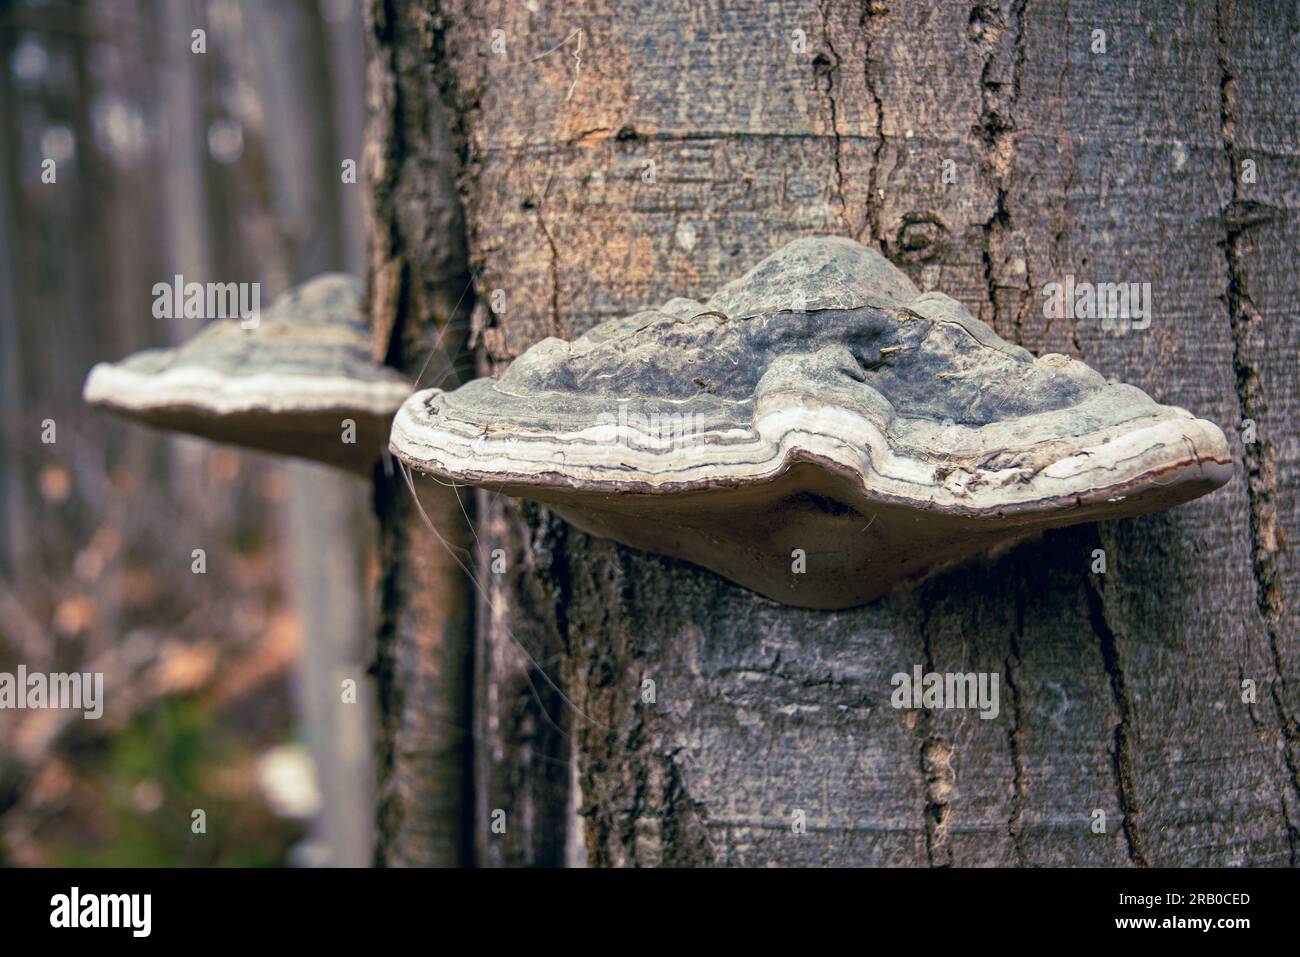 Two large samples of Polypores or tree fungi on a beech trunk in the Bavarian Forest region between mount Rachel and Lusen Stock Photo